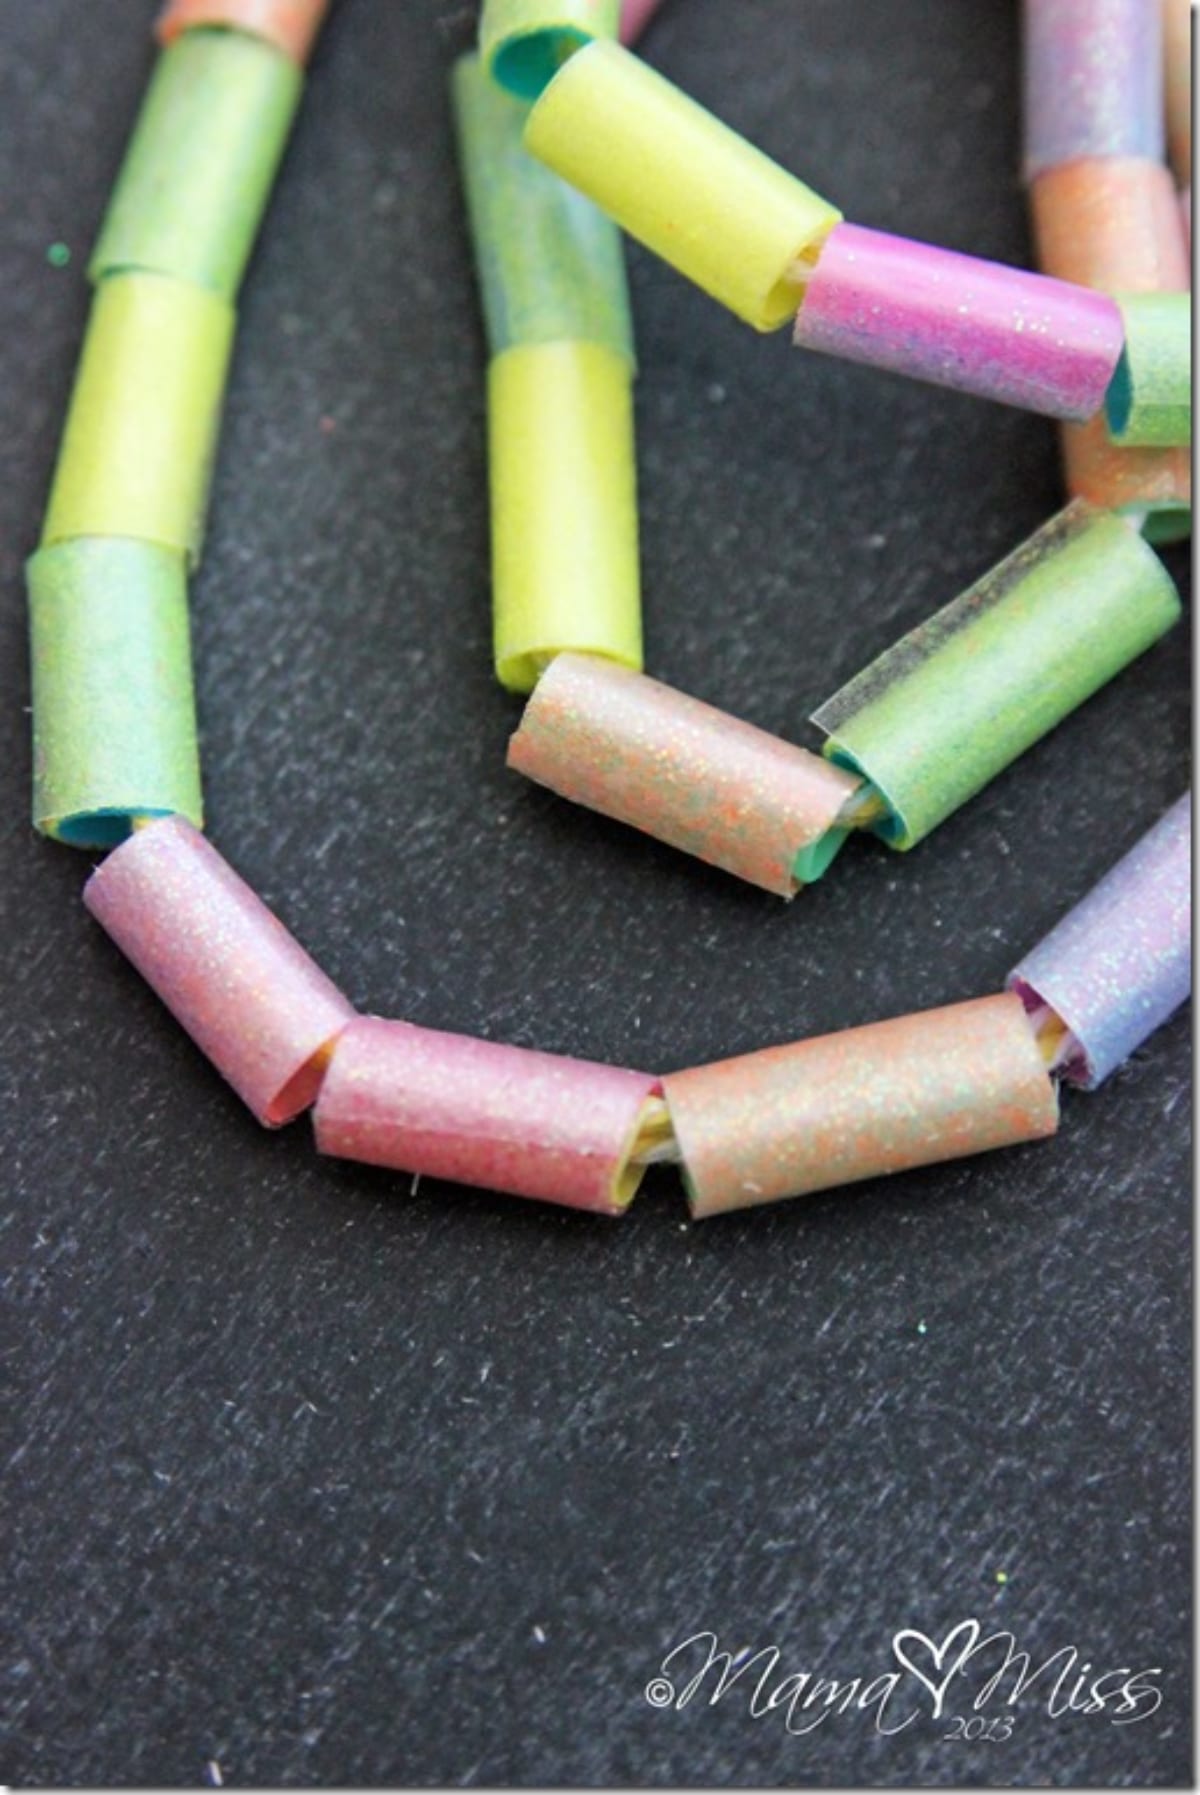 Shiny beads made out of straws